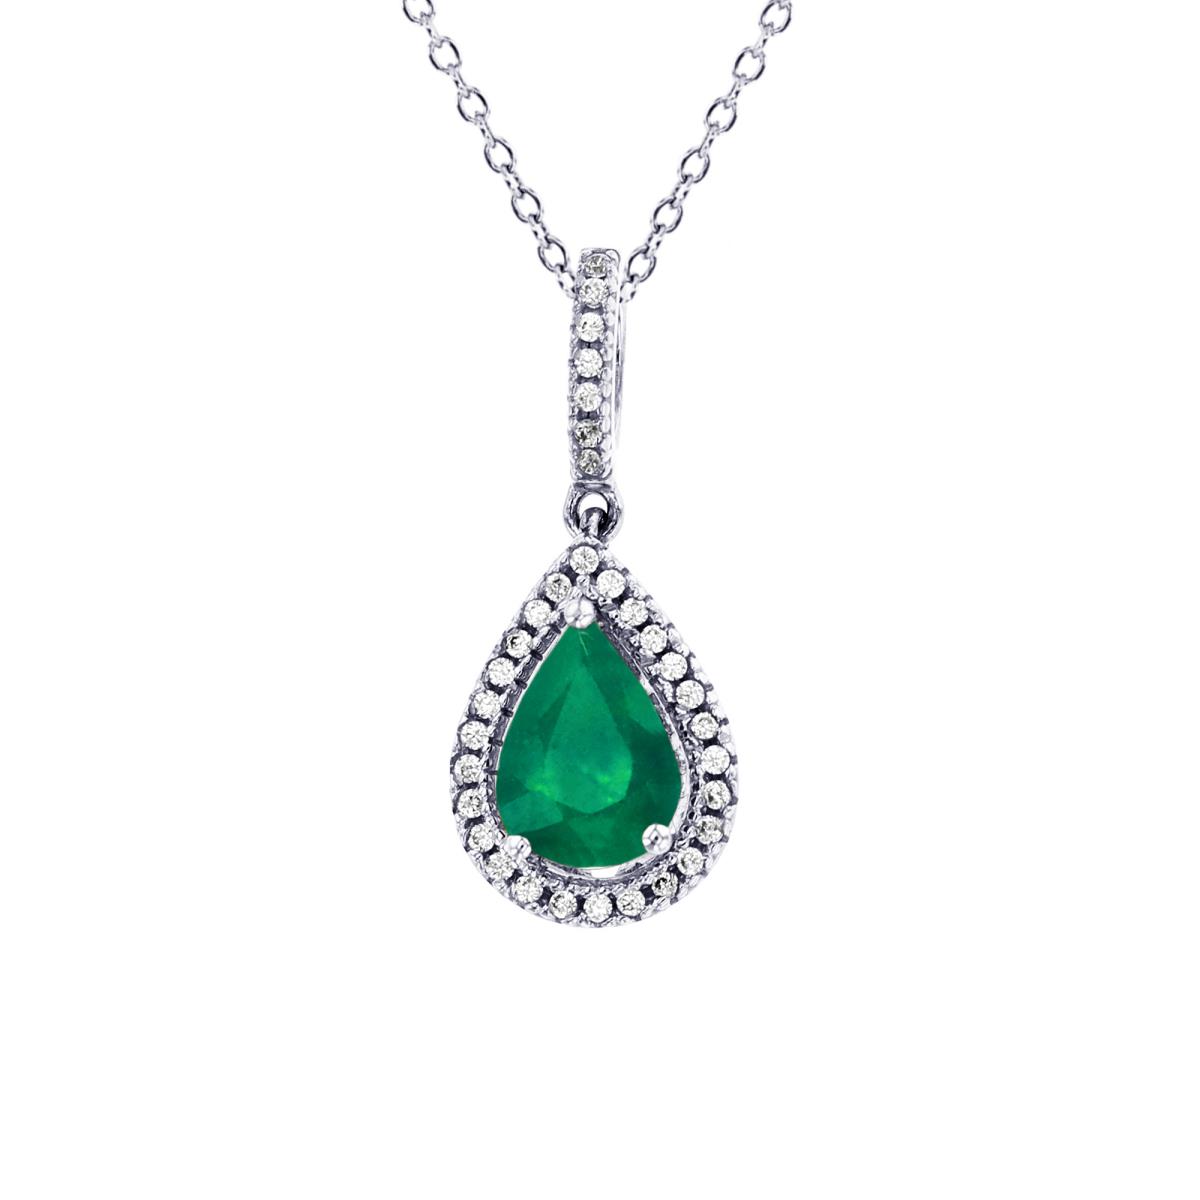 14K White Gold 0.10 CTTW Rnd Diamonds & 7x5mm PS Emerald Halo 18"Necklace